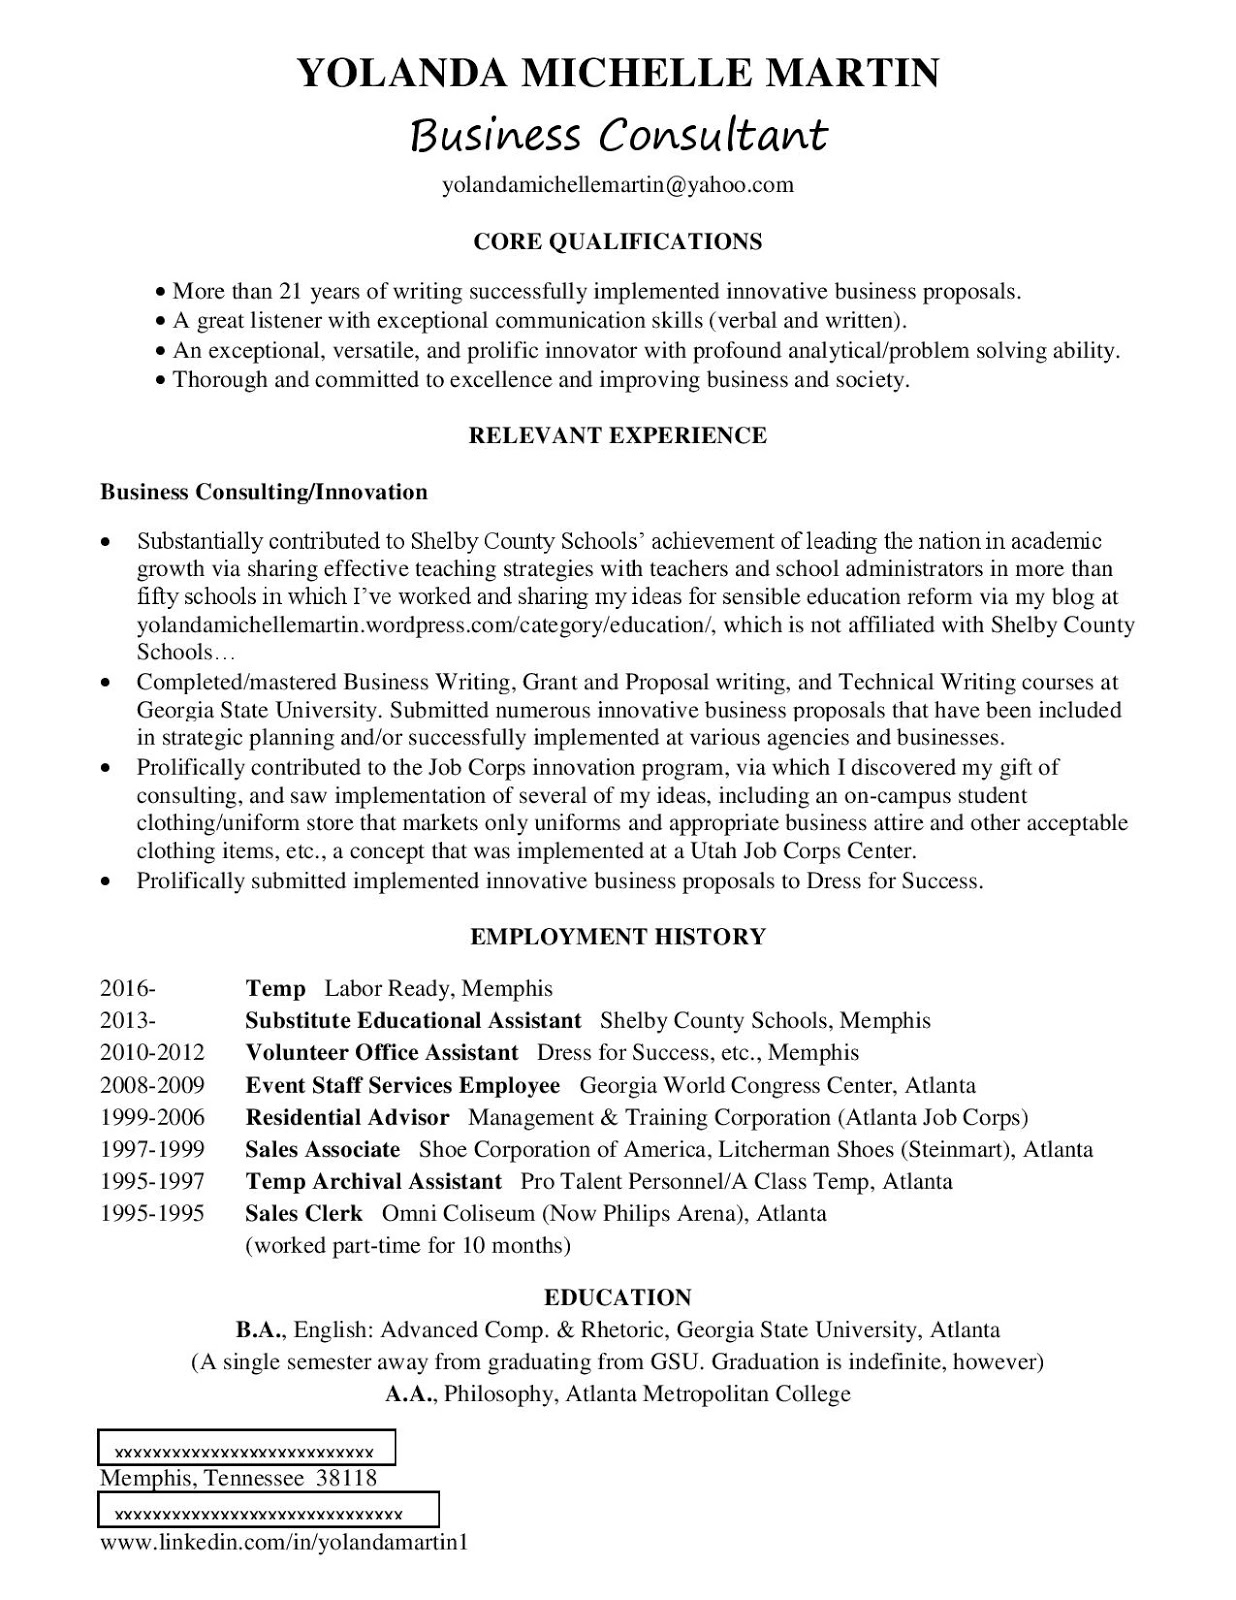 Resume relevant experience section